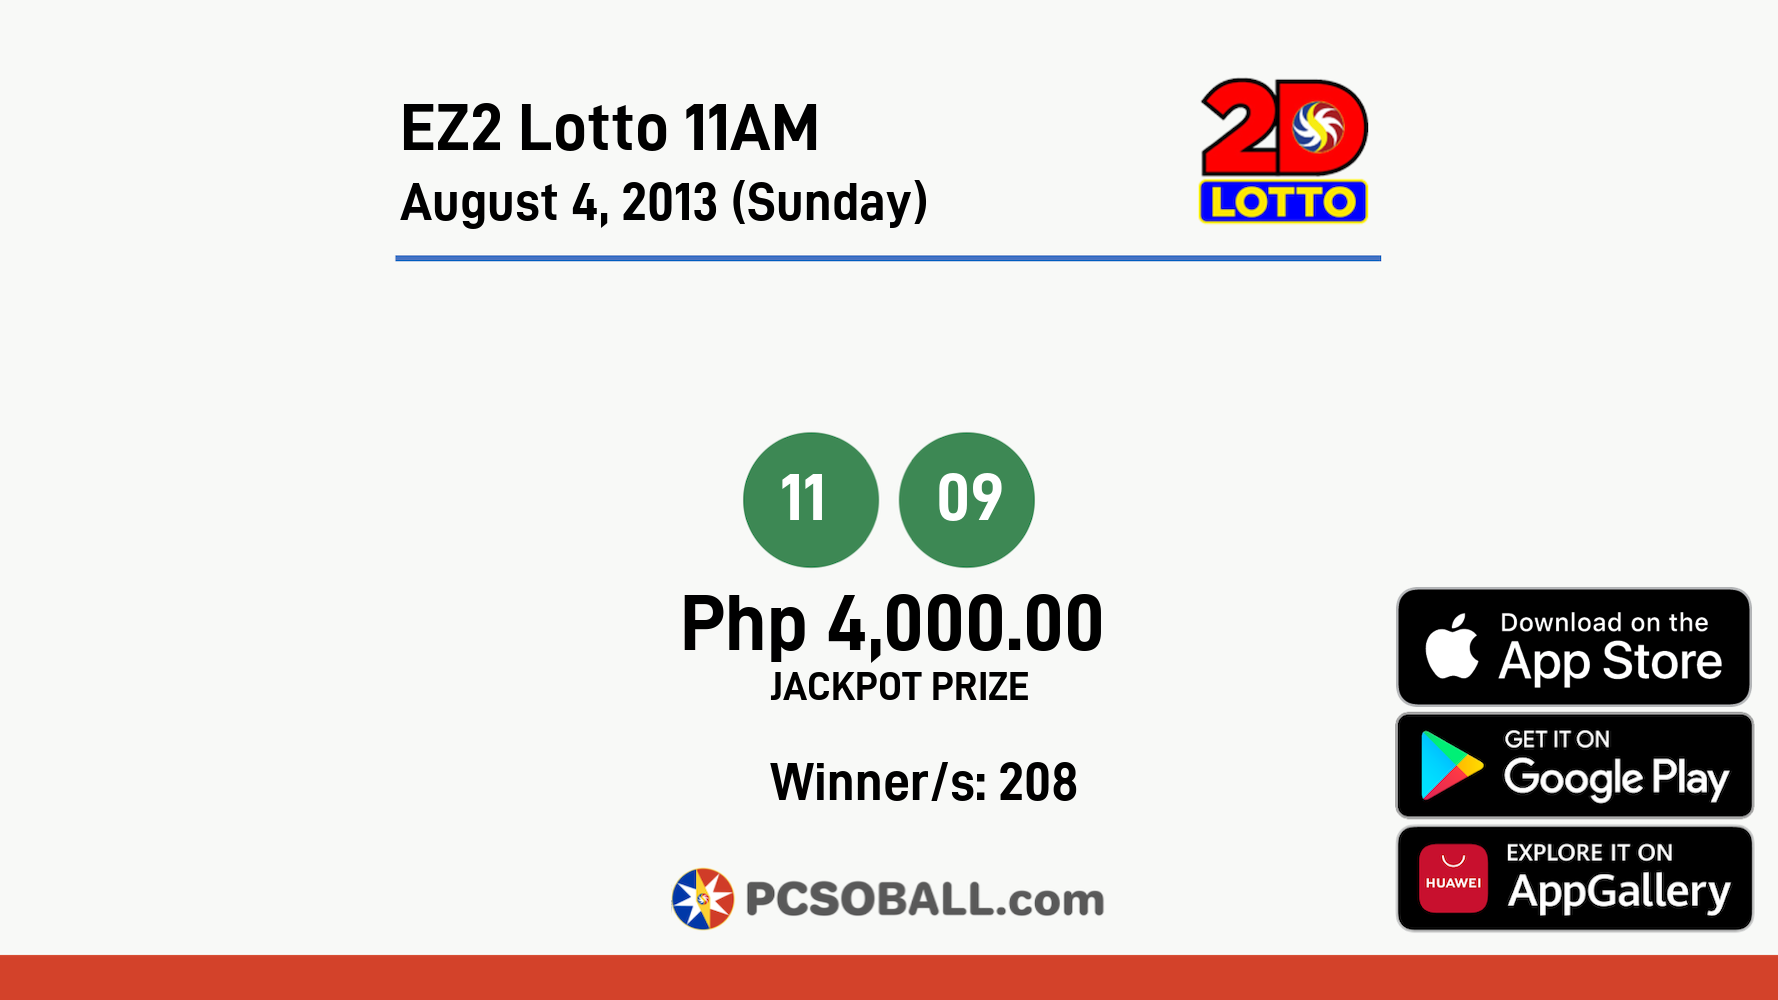 EZ2 Lotto 11AM August 4, 2013 (Sunday) Result